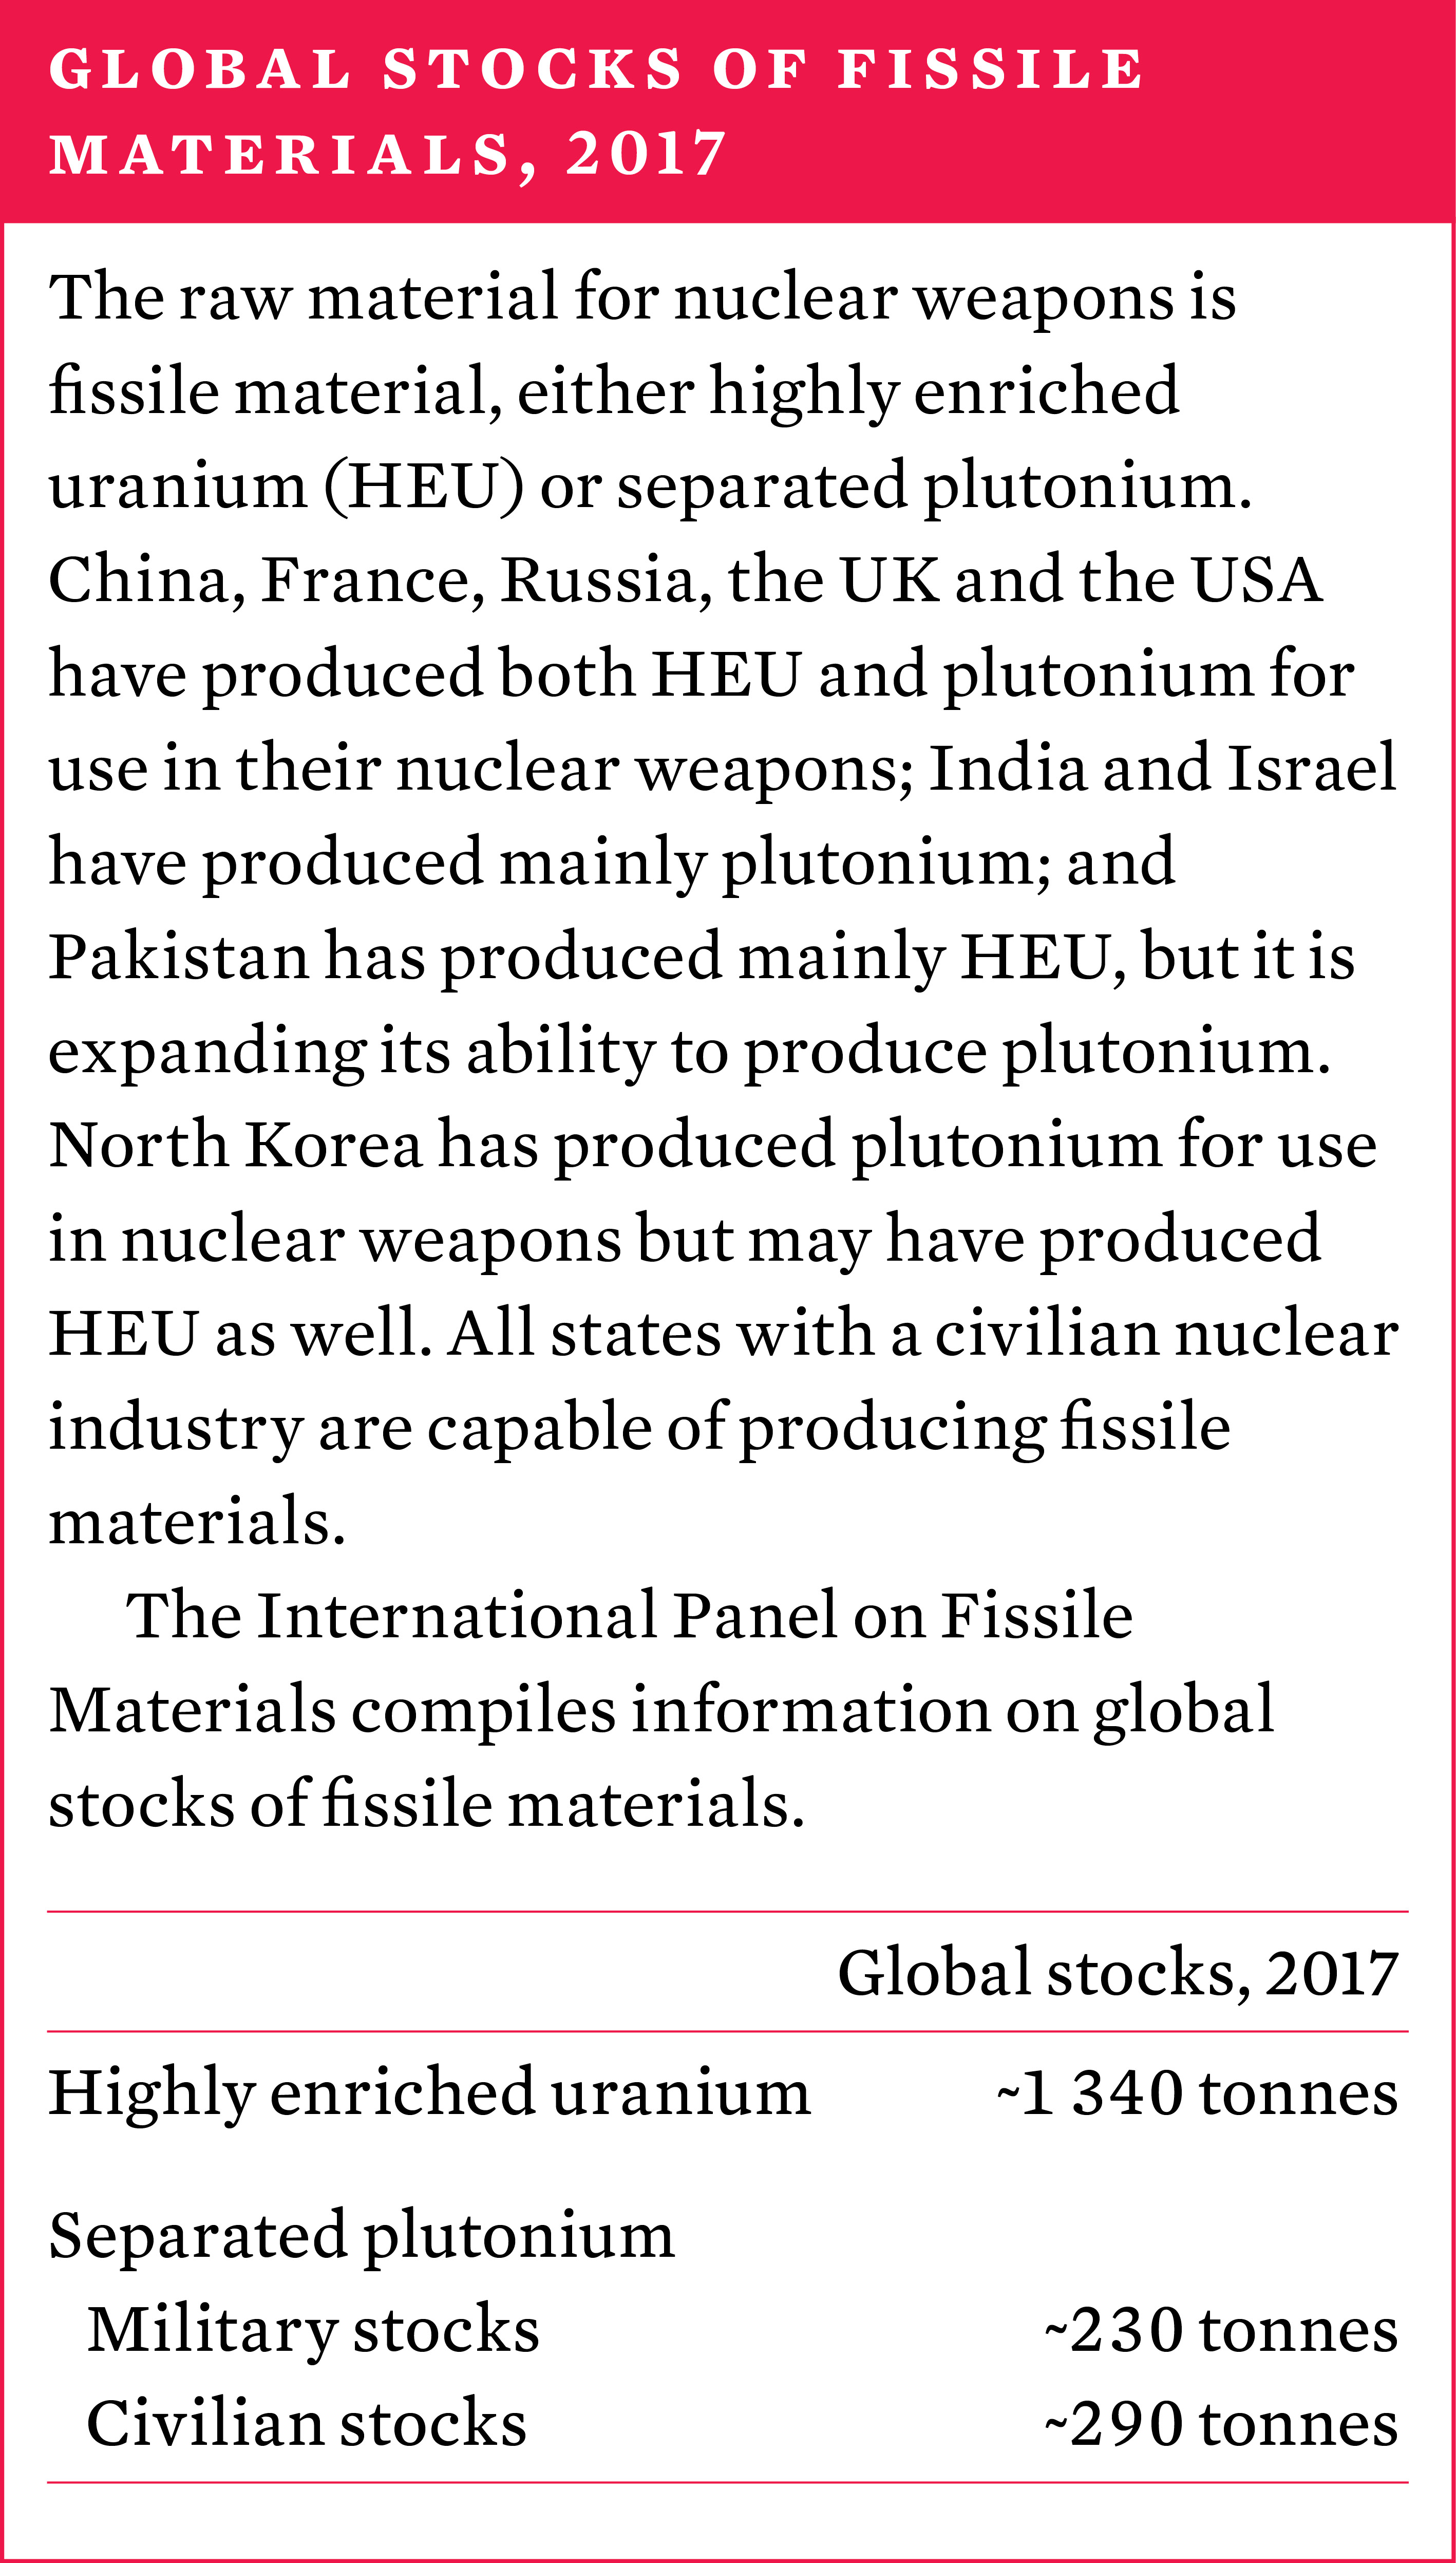 Global stocks of fissile materials, 2017